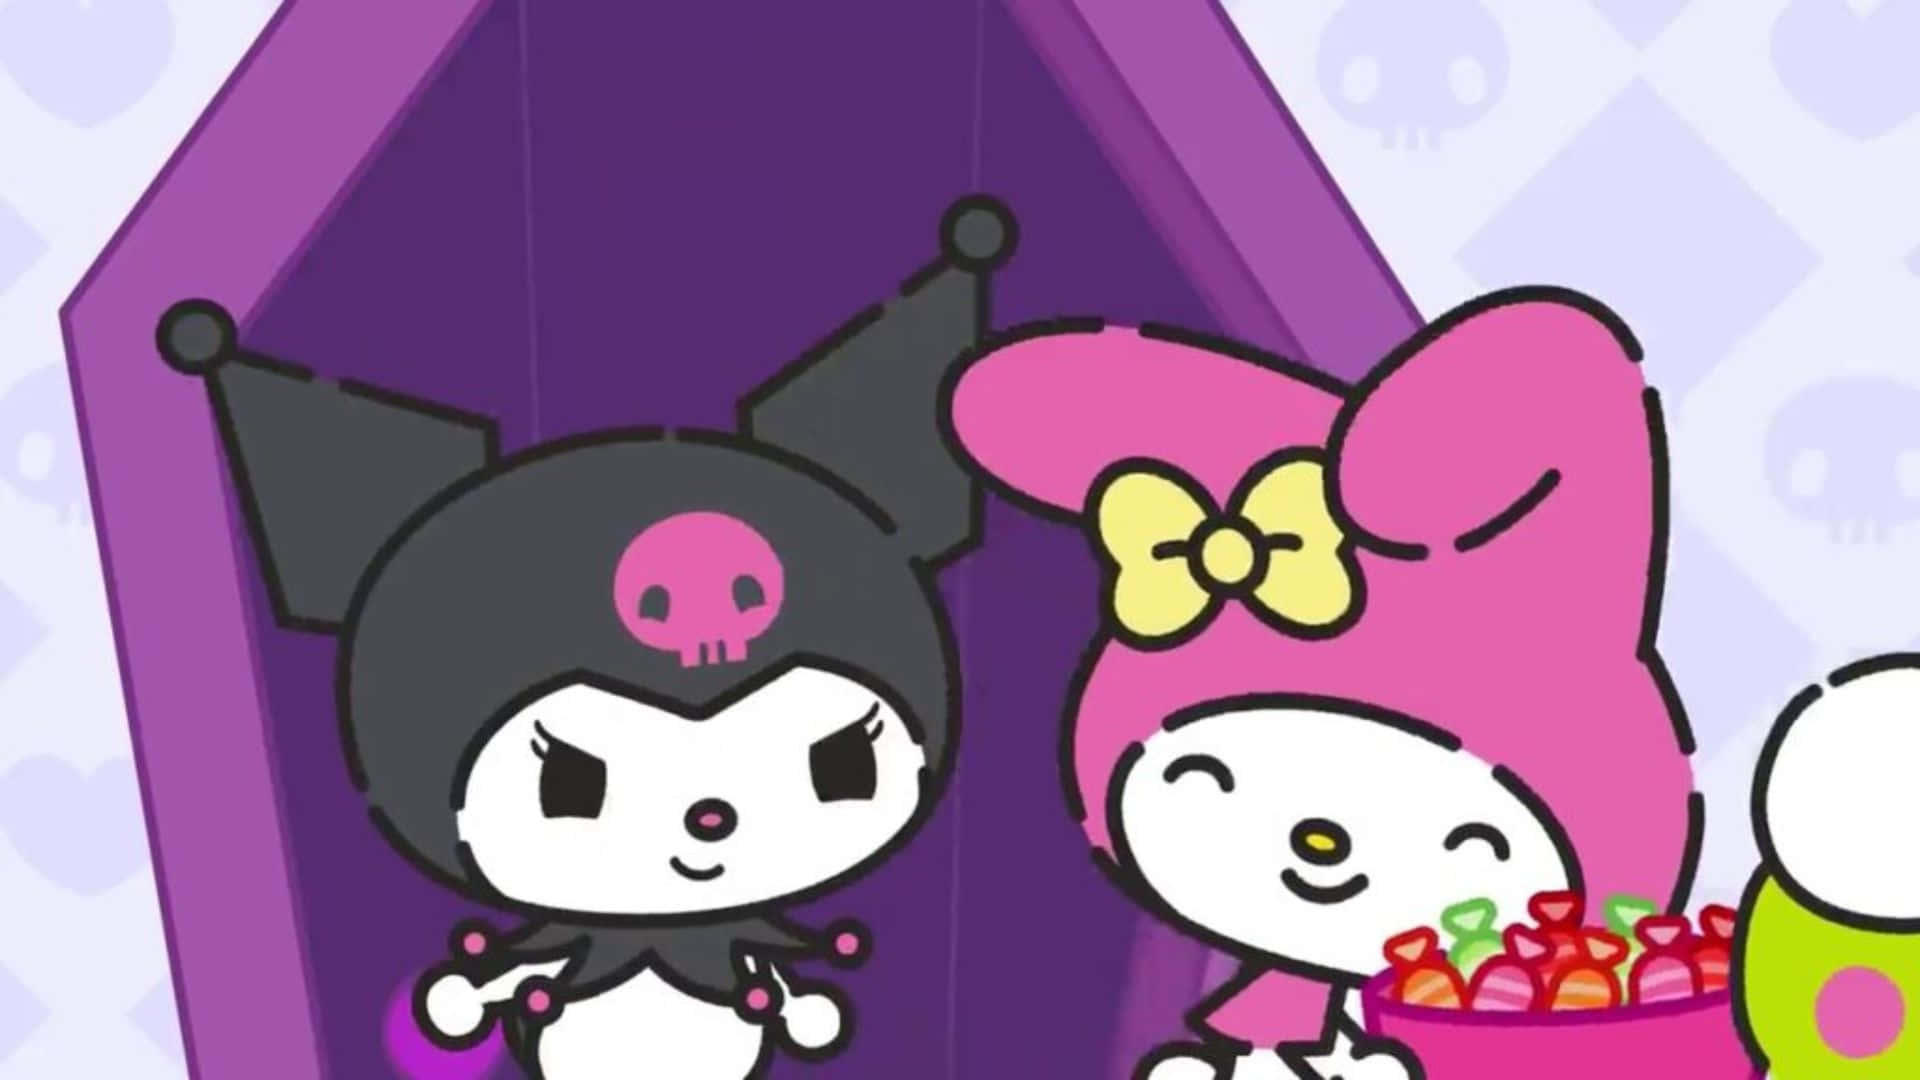 Kuromi and My Melody enjoy a playful moment together. Wallpaper